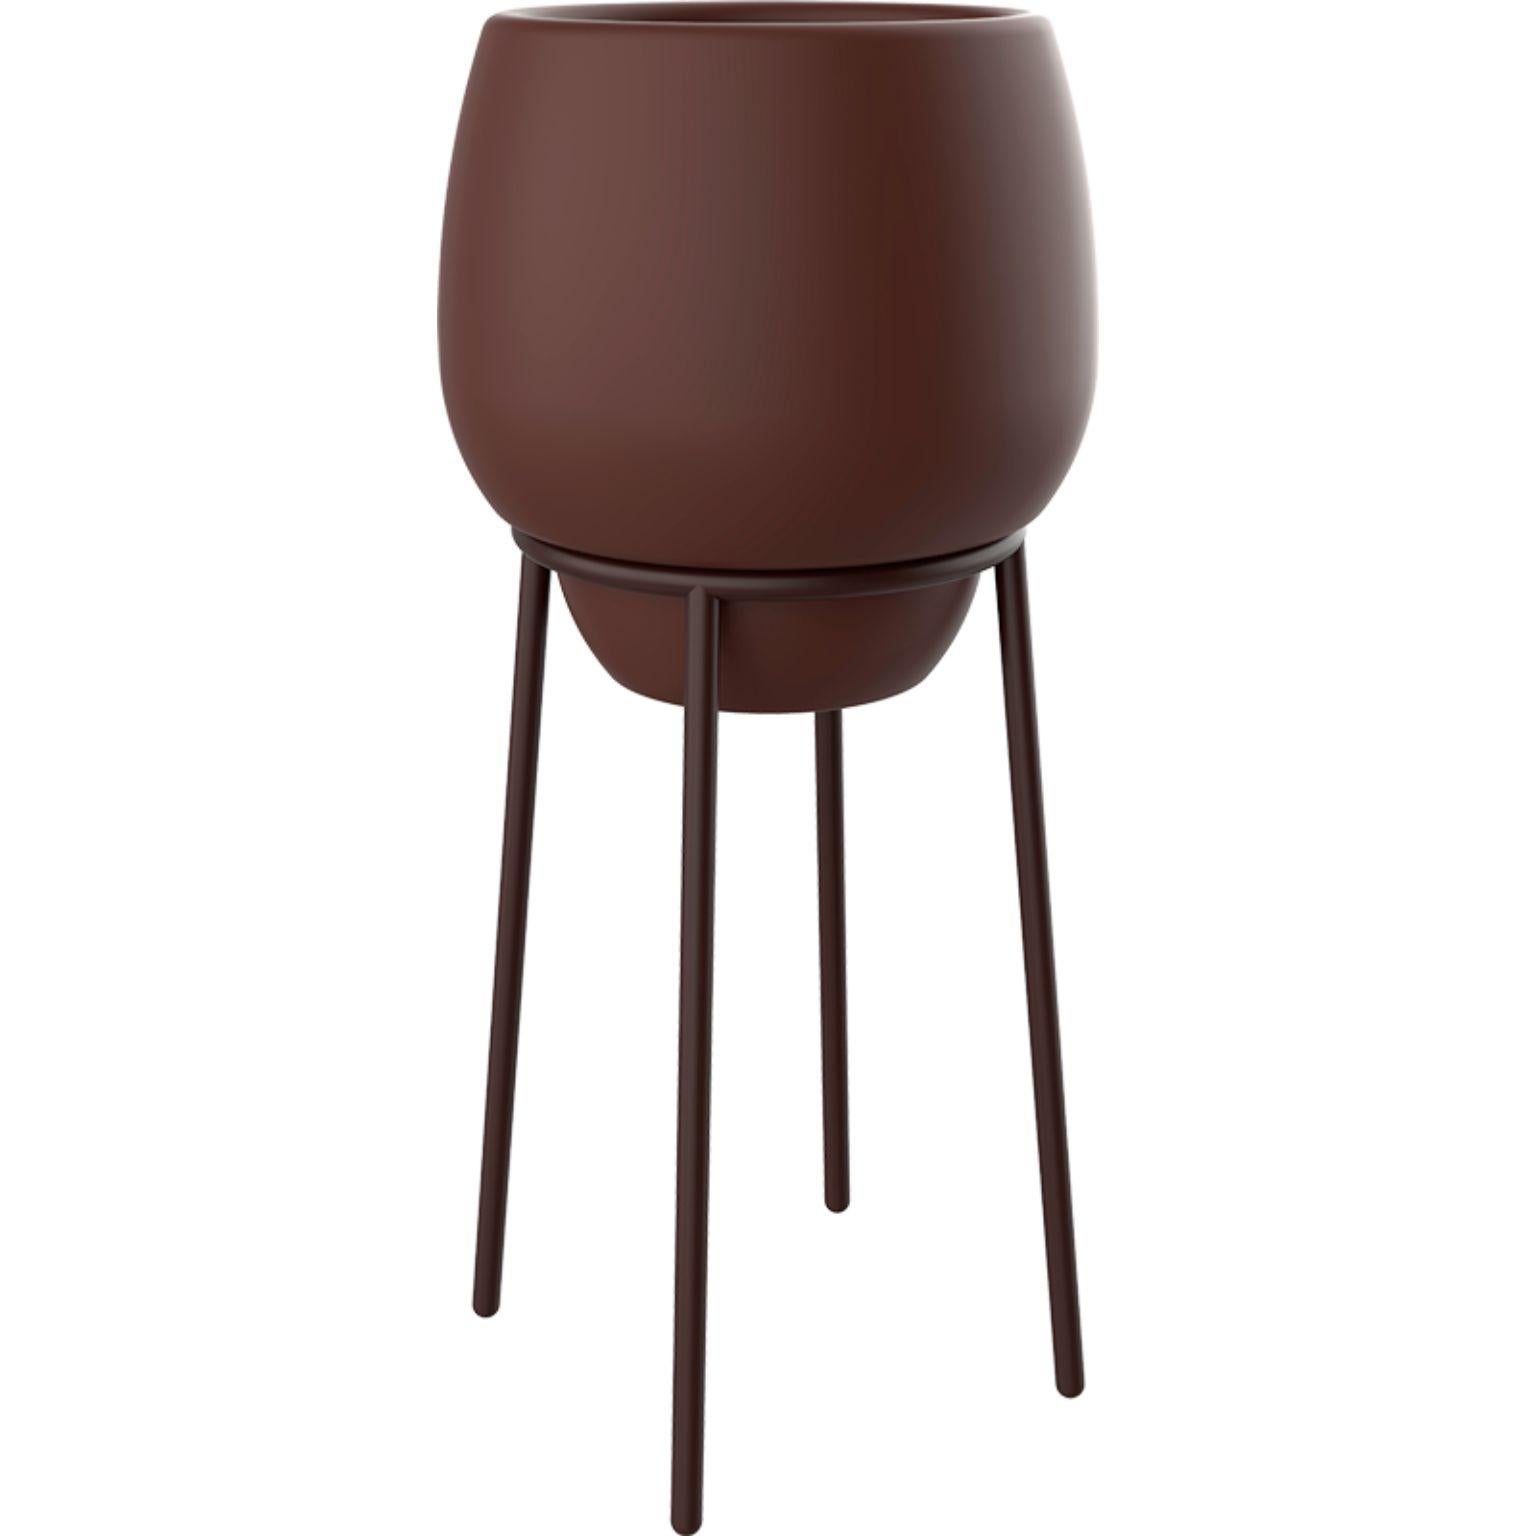 Lace Chocolate High 50 pot by MOWEE
Dimensions: Ø55 x H112 cm.
Material: Polyethylene and stainless steel.
Weight: 9 kg.
Also available in different colors and finishes (Lacquered or retroilluminated). 

Lace is a collection of furniture made